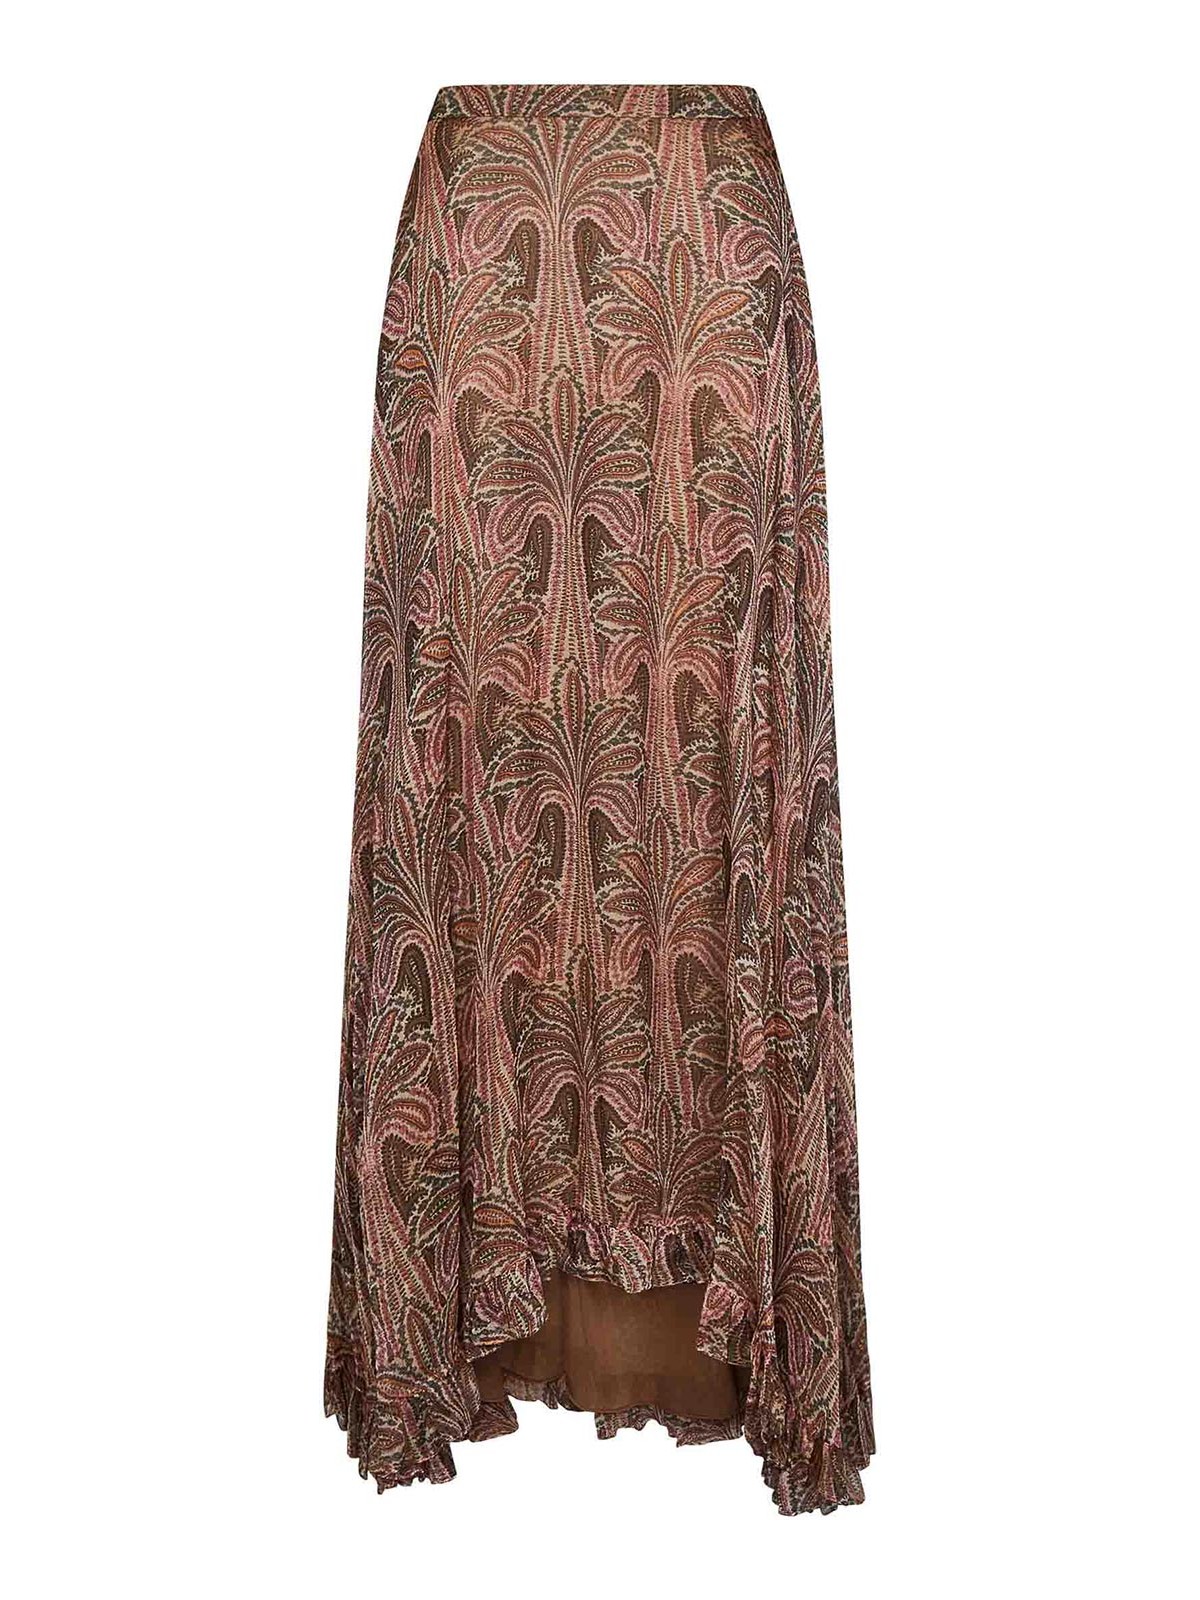 ETRO LONG PINK CREPON SILK SKIRT WITH FLORAL PRINT